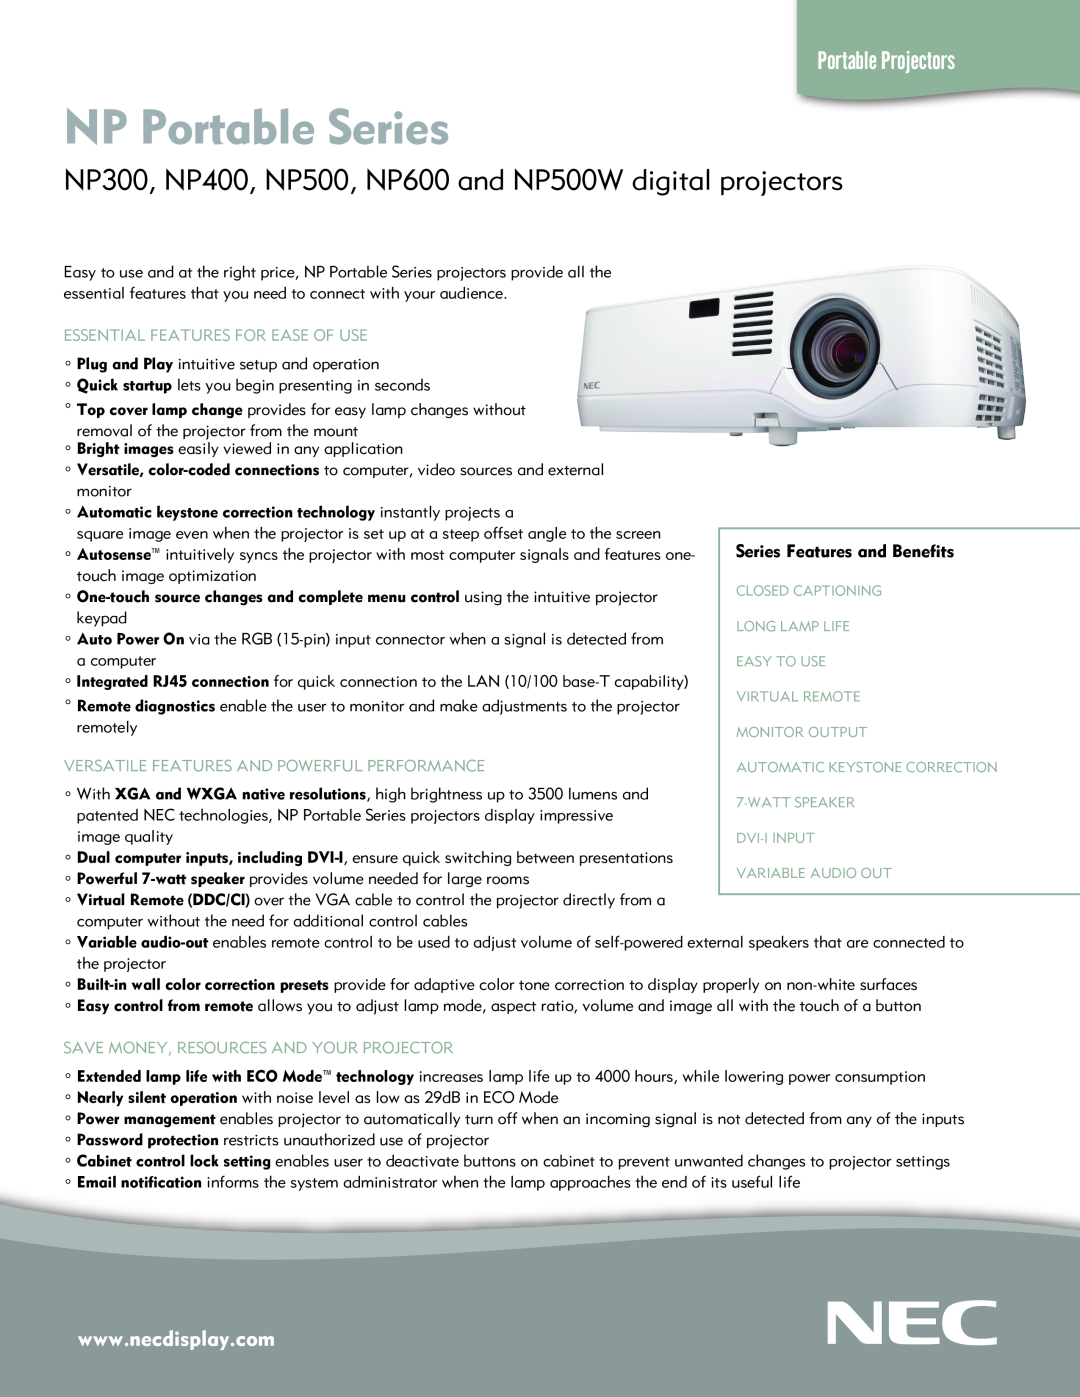 NEC NP500WG, NP600G, NP500G, NP400G user manual NP600/NP500/NP400 NP500W, Portable Projector, User’s Manual 